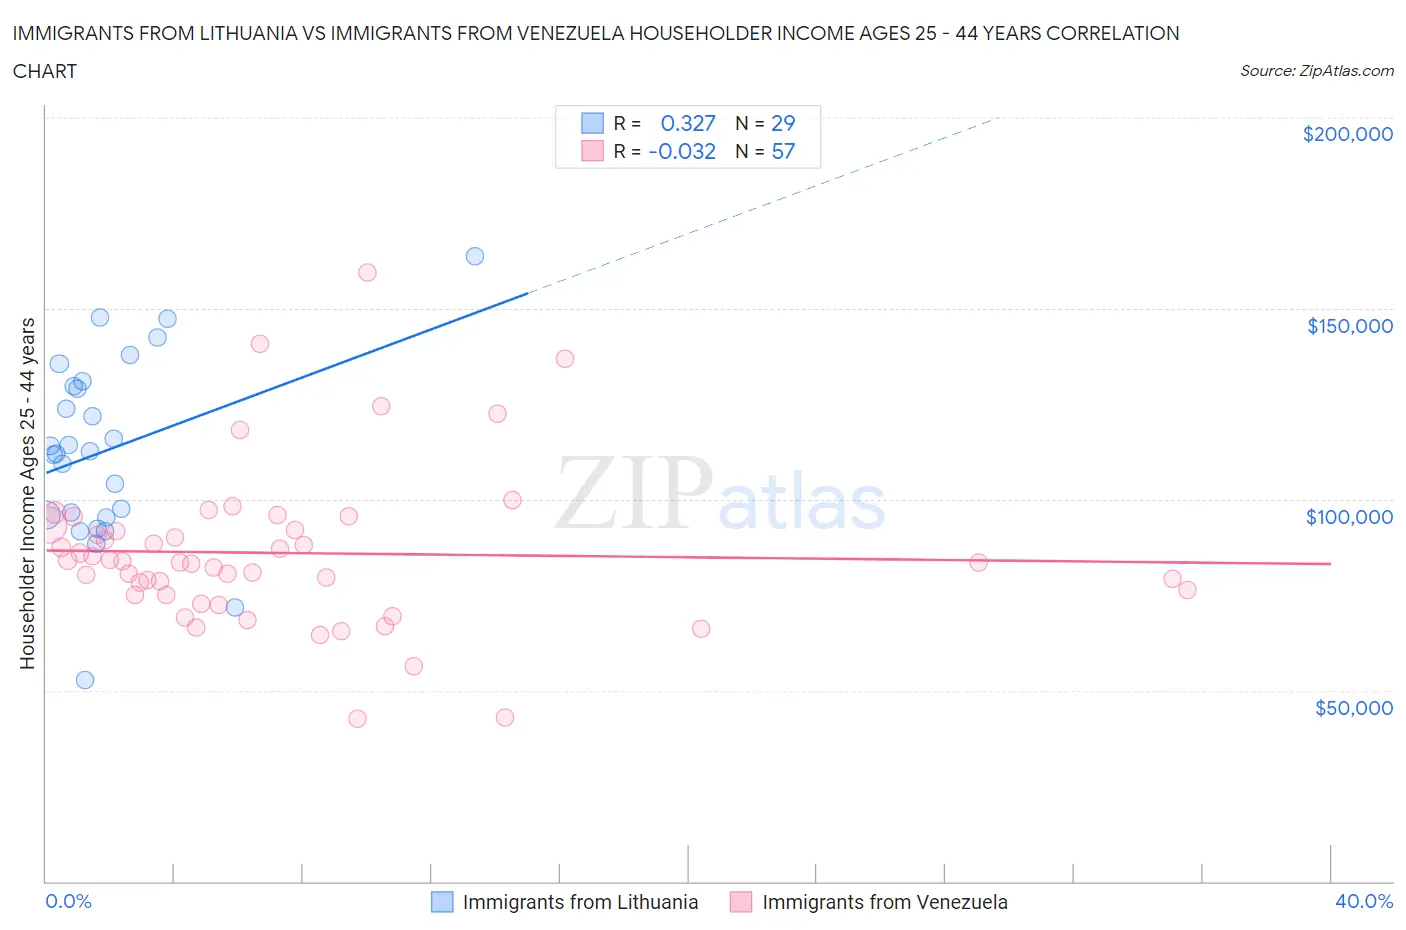 Immigrants from Lithuania vs Immigrants from Venezuela Householder Income Ages 25 - 44 years